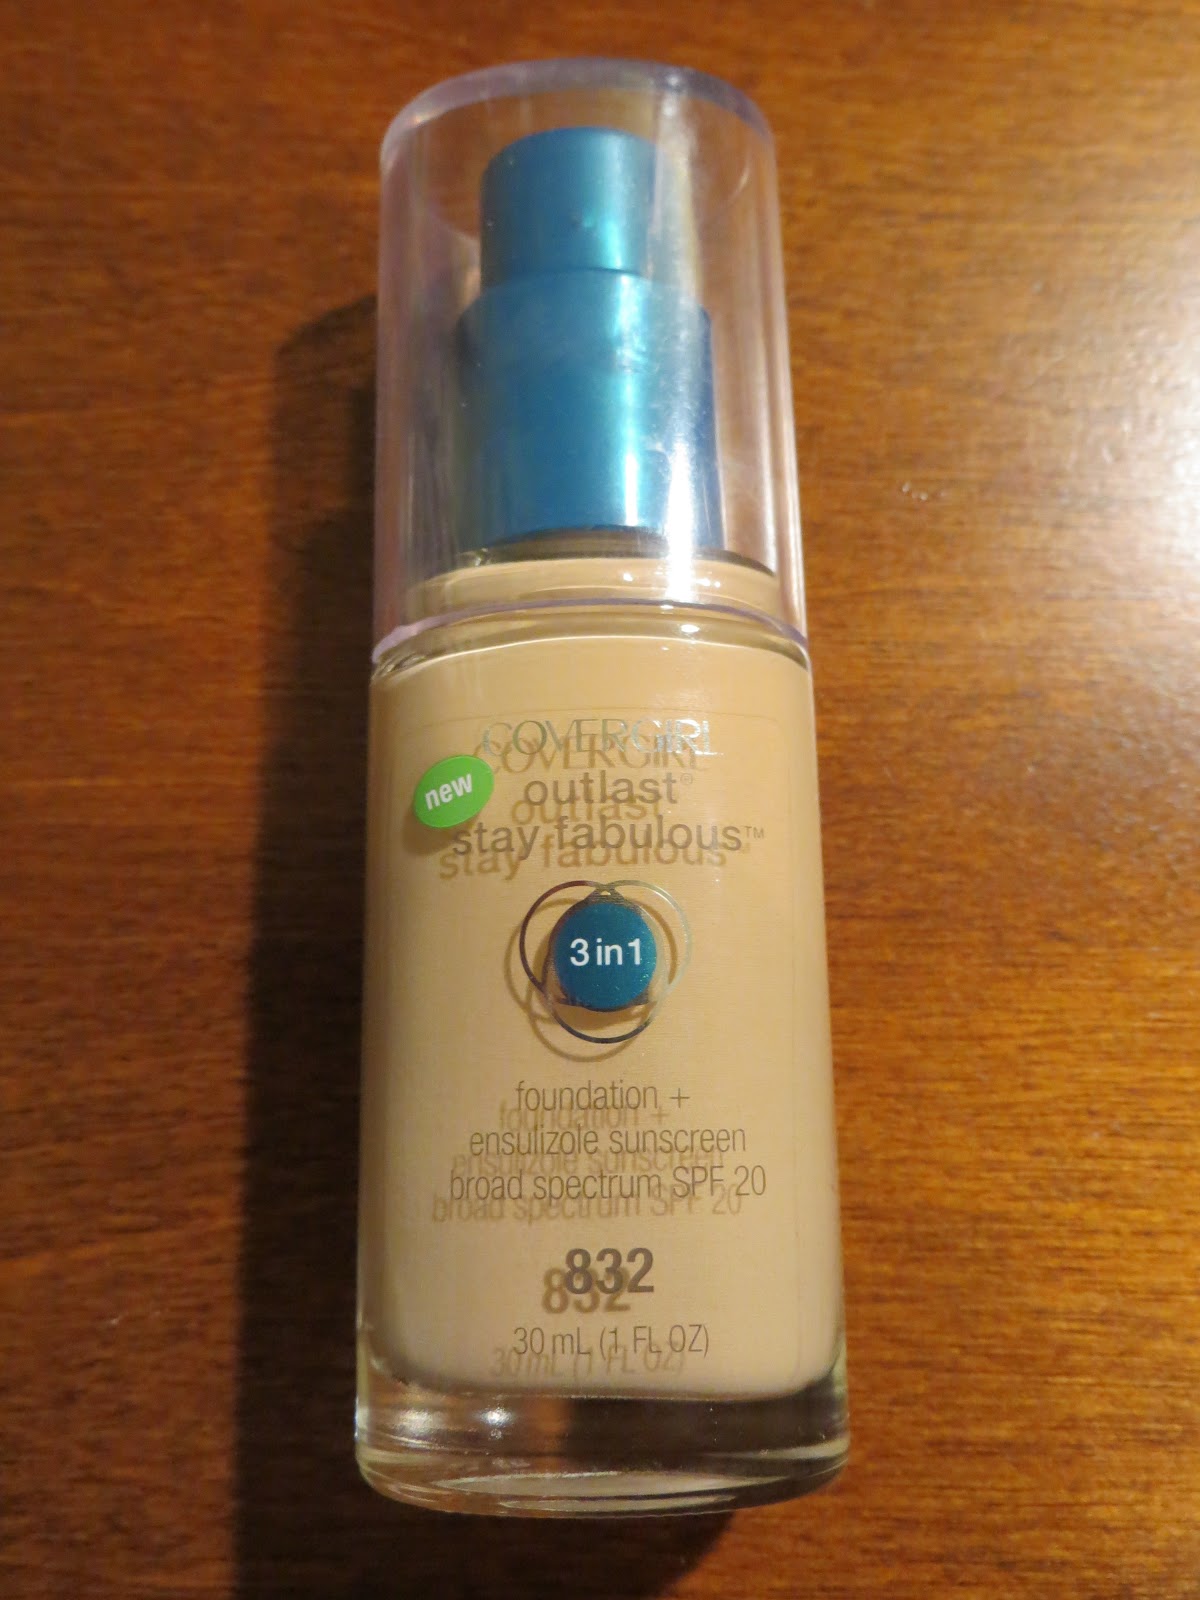 CoverGirl Outlast Stay Fabulous Foundation Review!